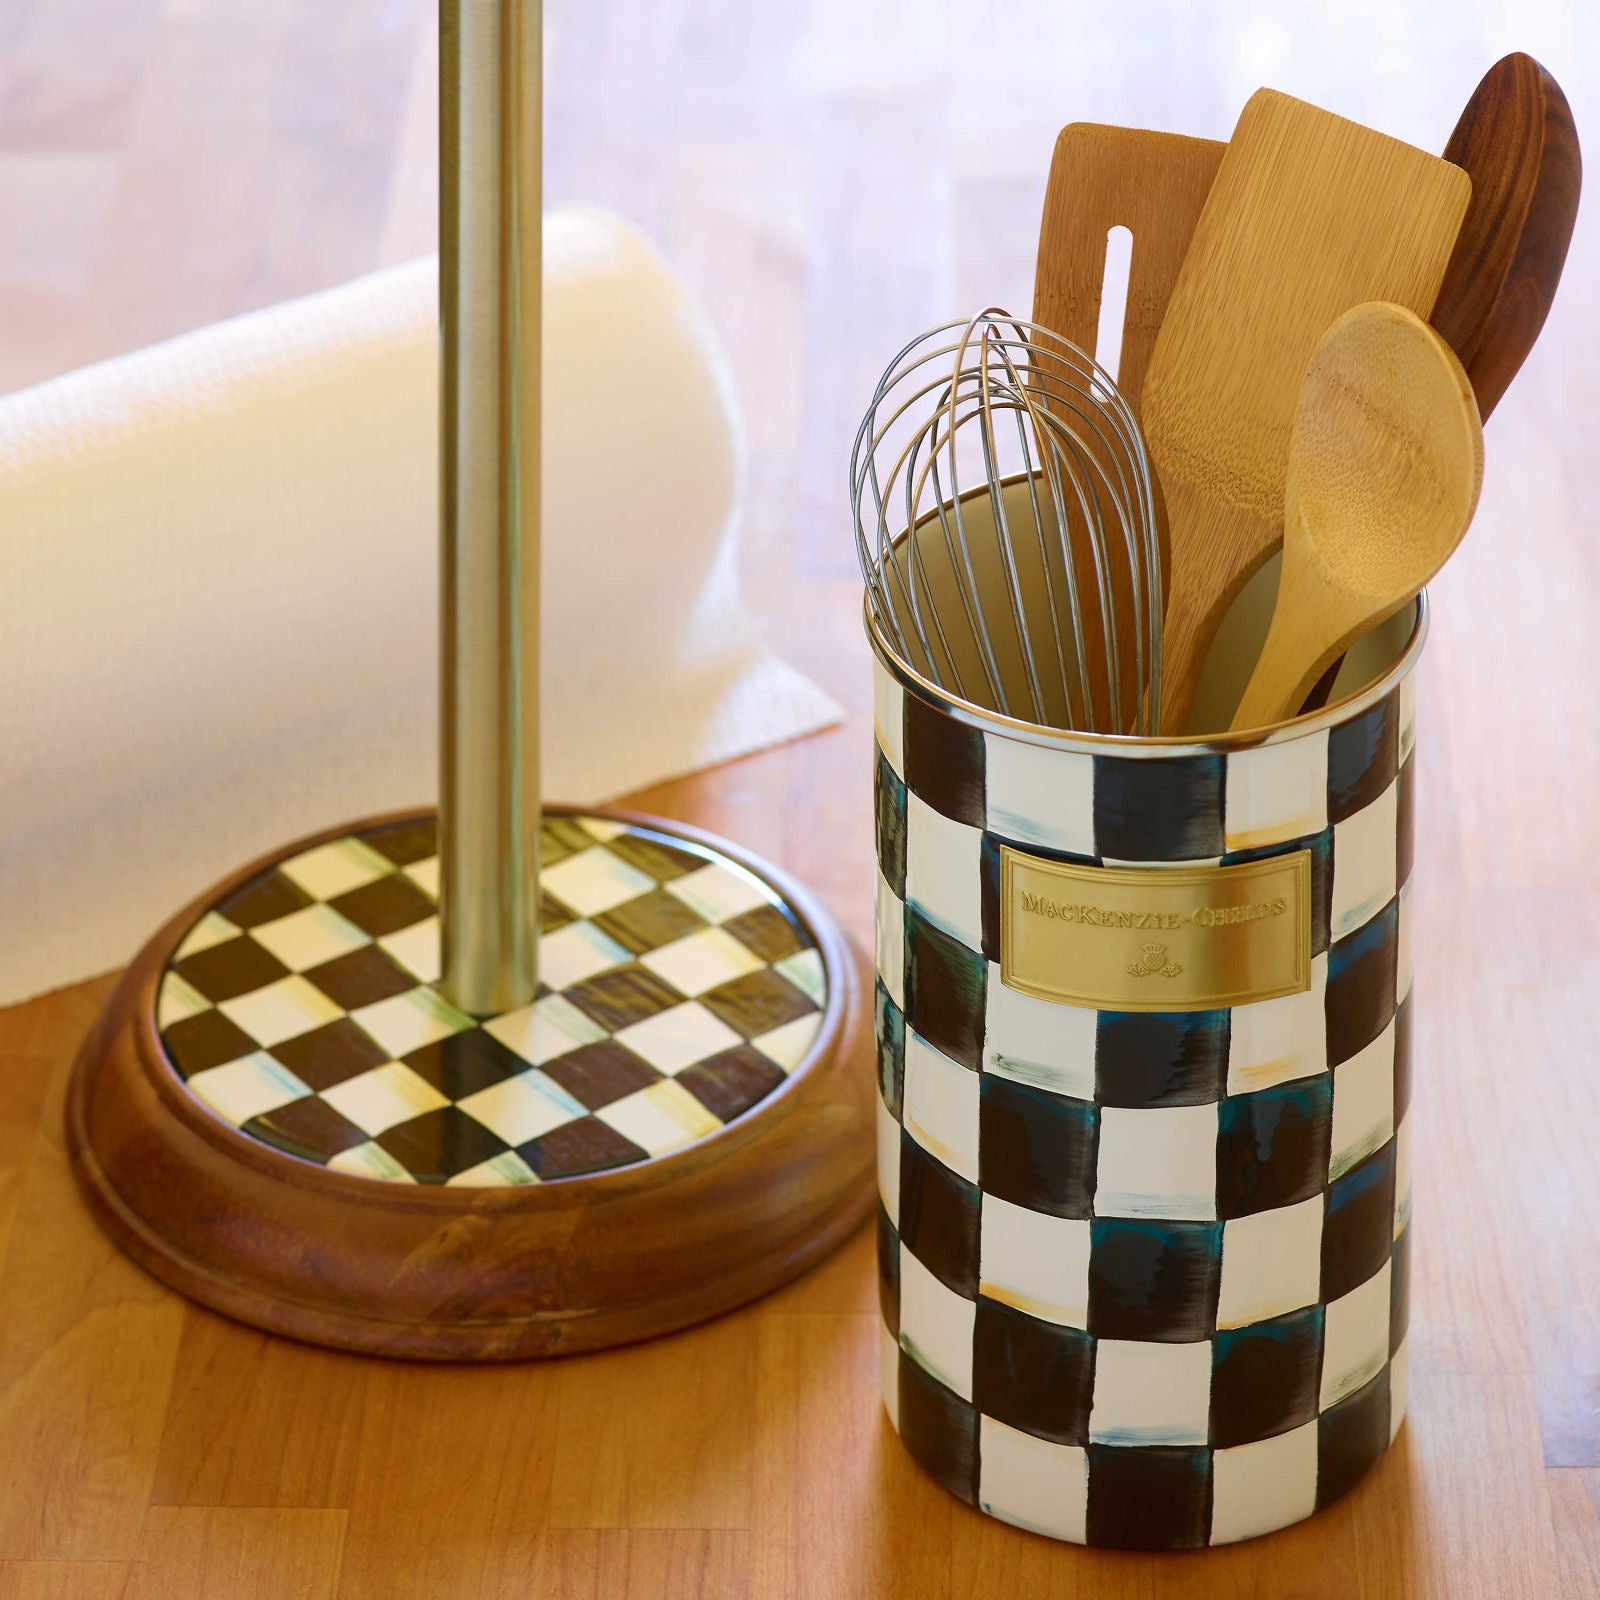 Courtly Check Enamel Utensil Holder by Mackenzie-Childs - |VESIMI Design| Luxury and Rustic bathrooms online